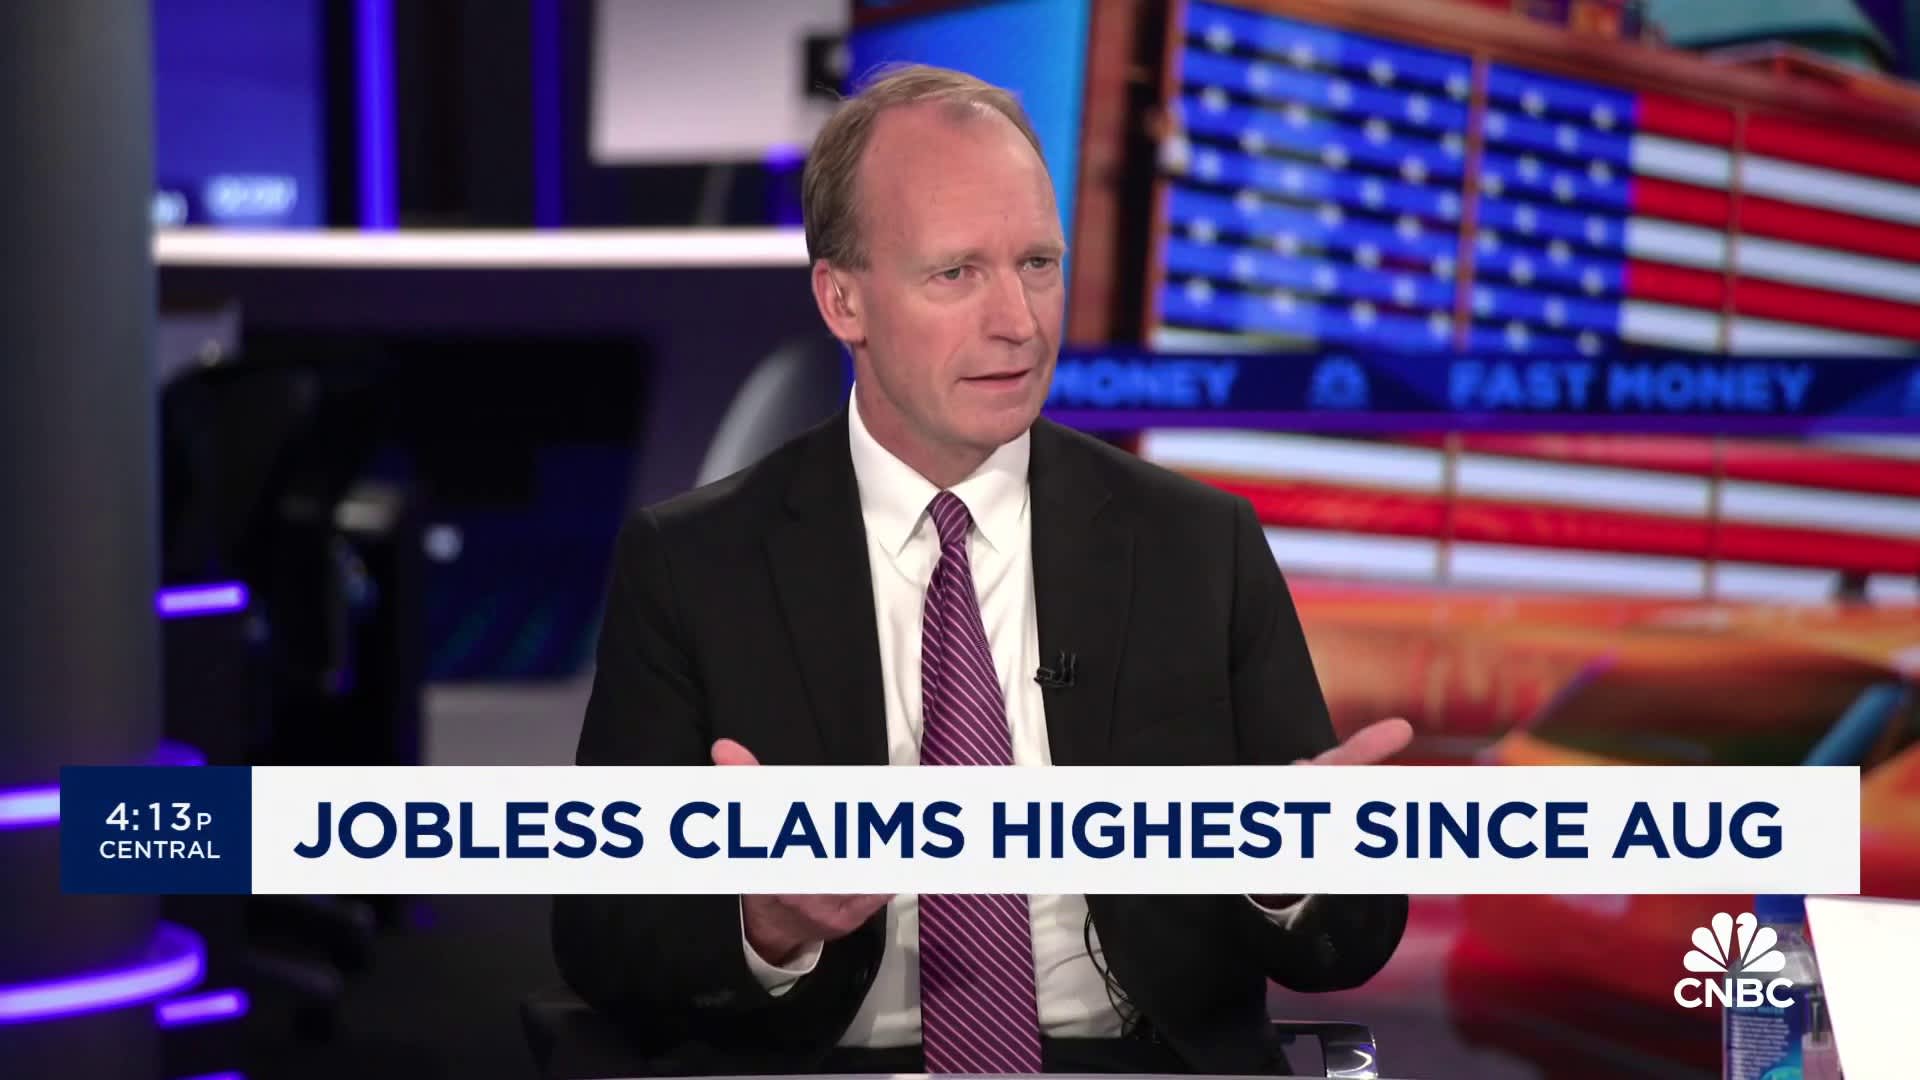 U.S. economy at risk of seeing higher rates, warns NewEdge’s Ben Emons [Video]